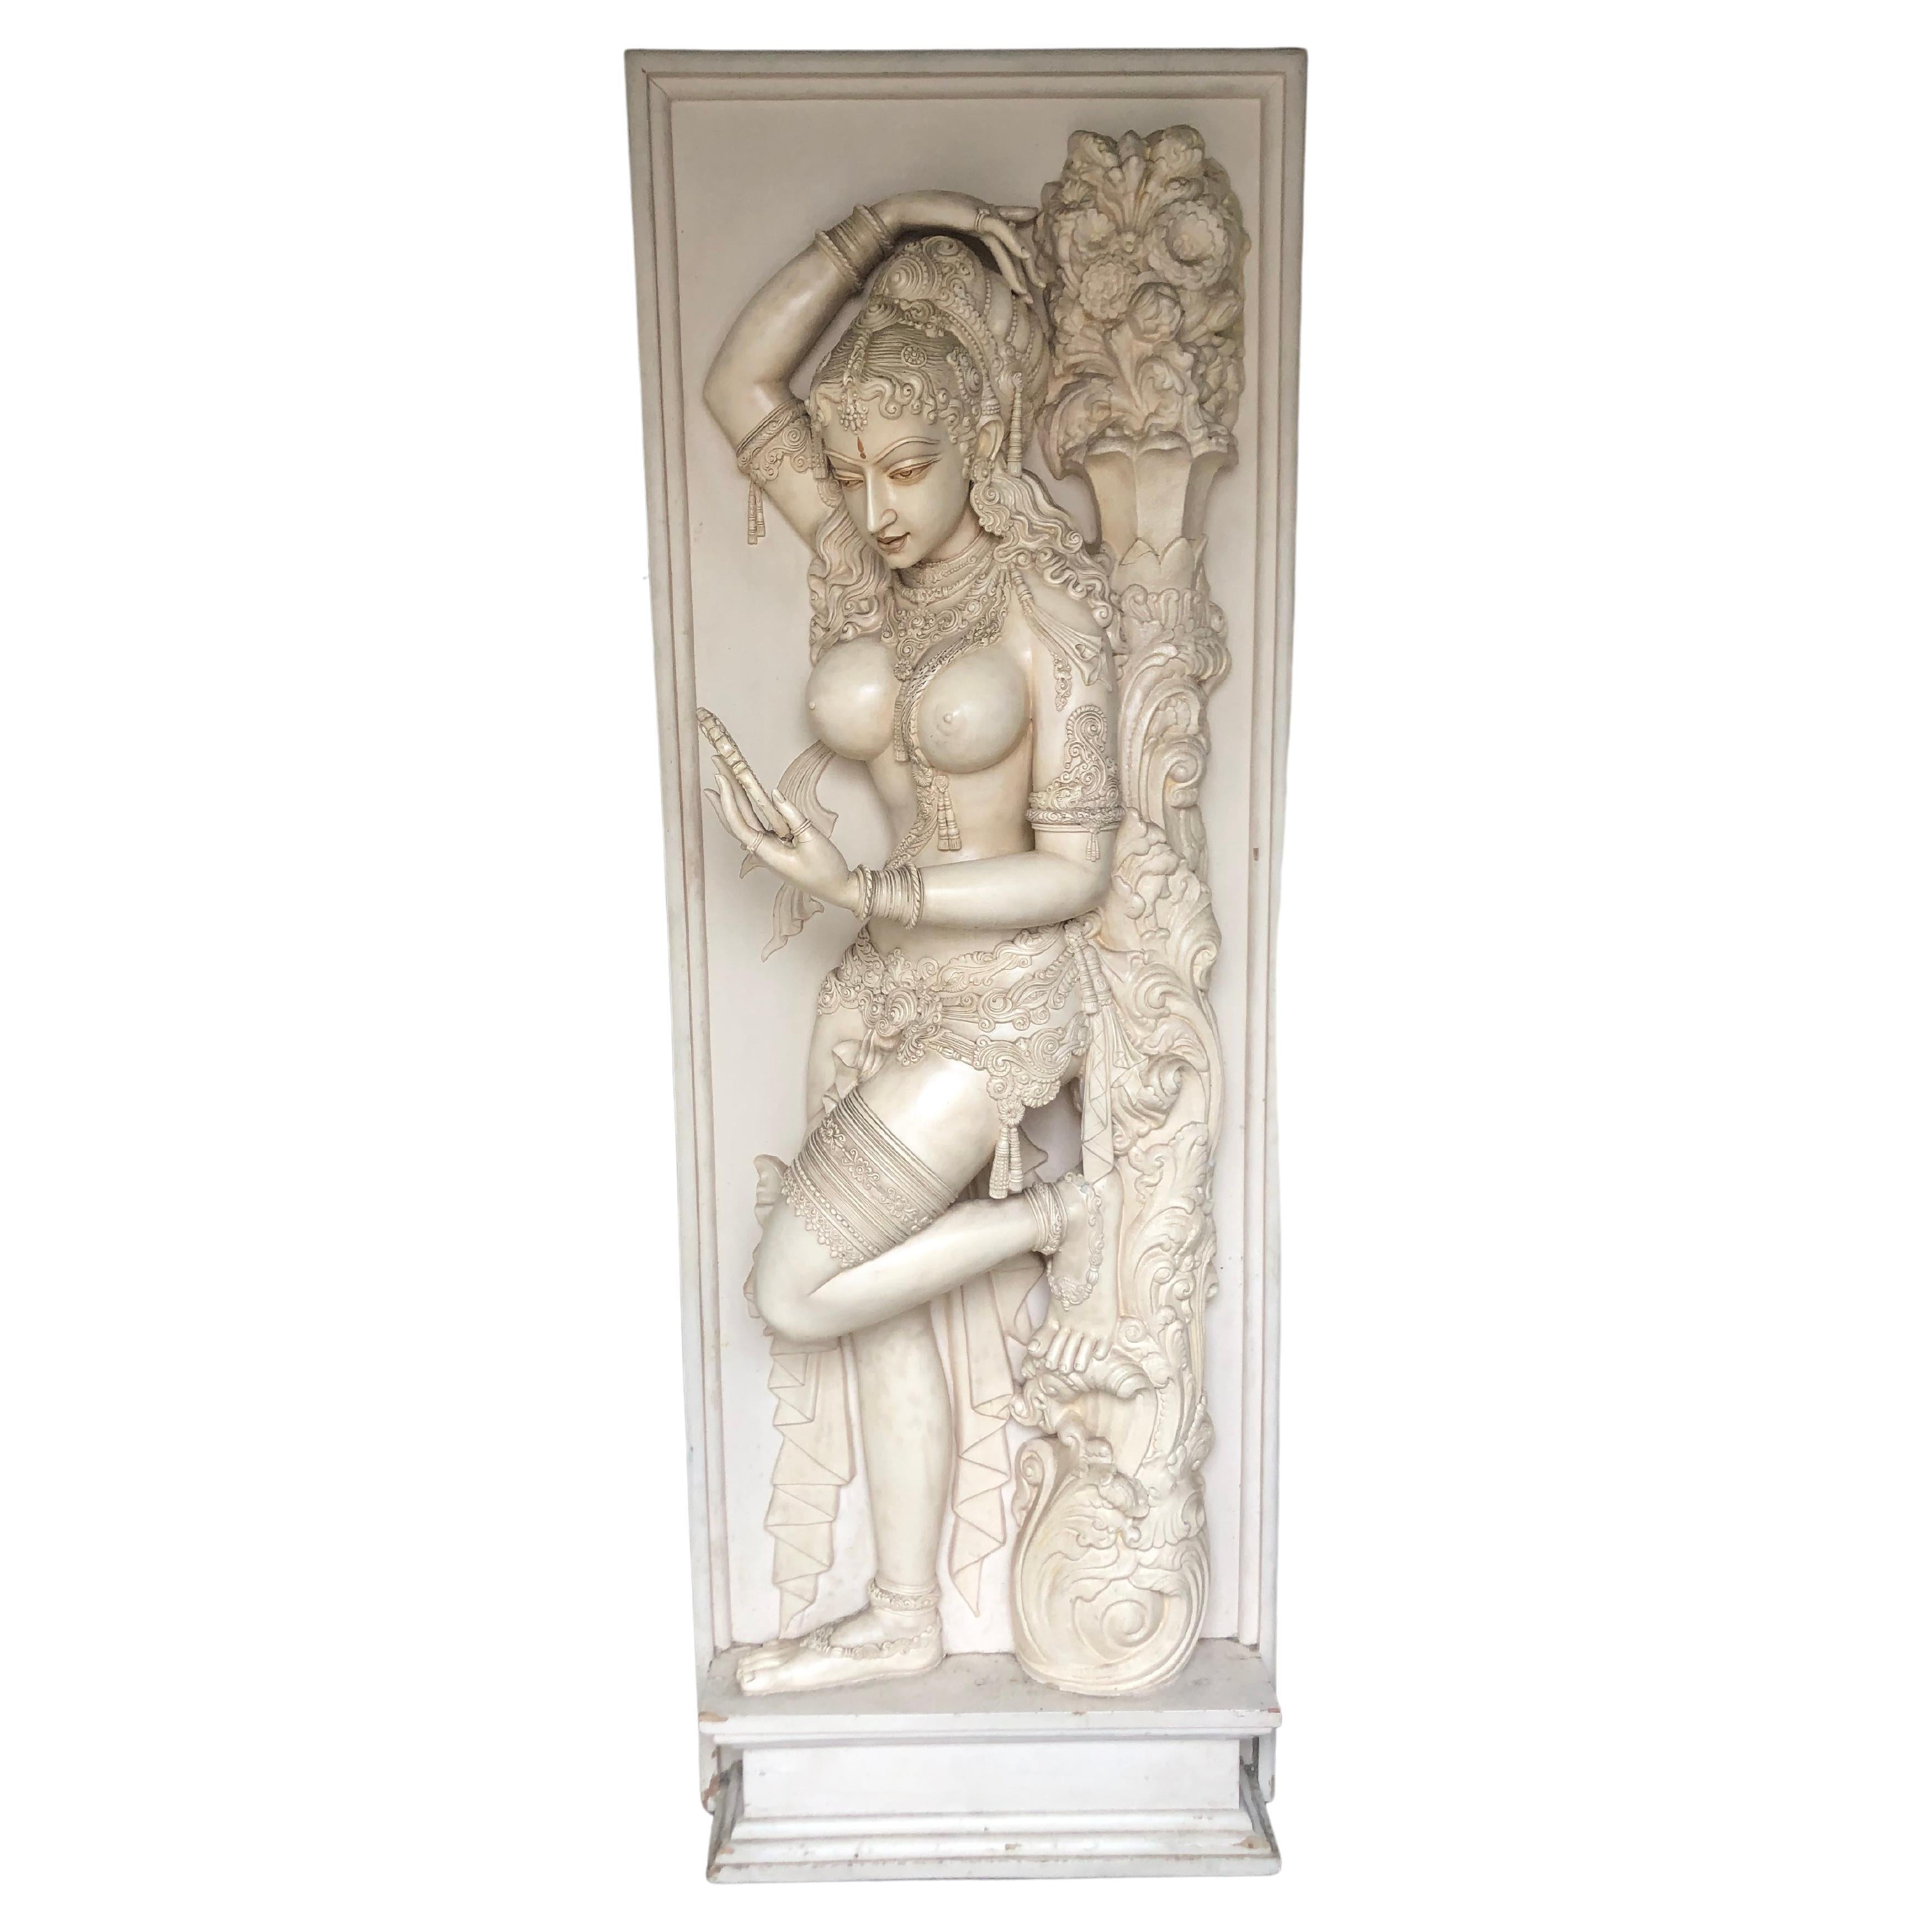 A fabulous pair of panels of two exotic Indian dancers with incredible details. These two panels were molded from original wood carved panels in India and shipped over to the united states in the late 60s. The detailing is amazing and hard to